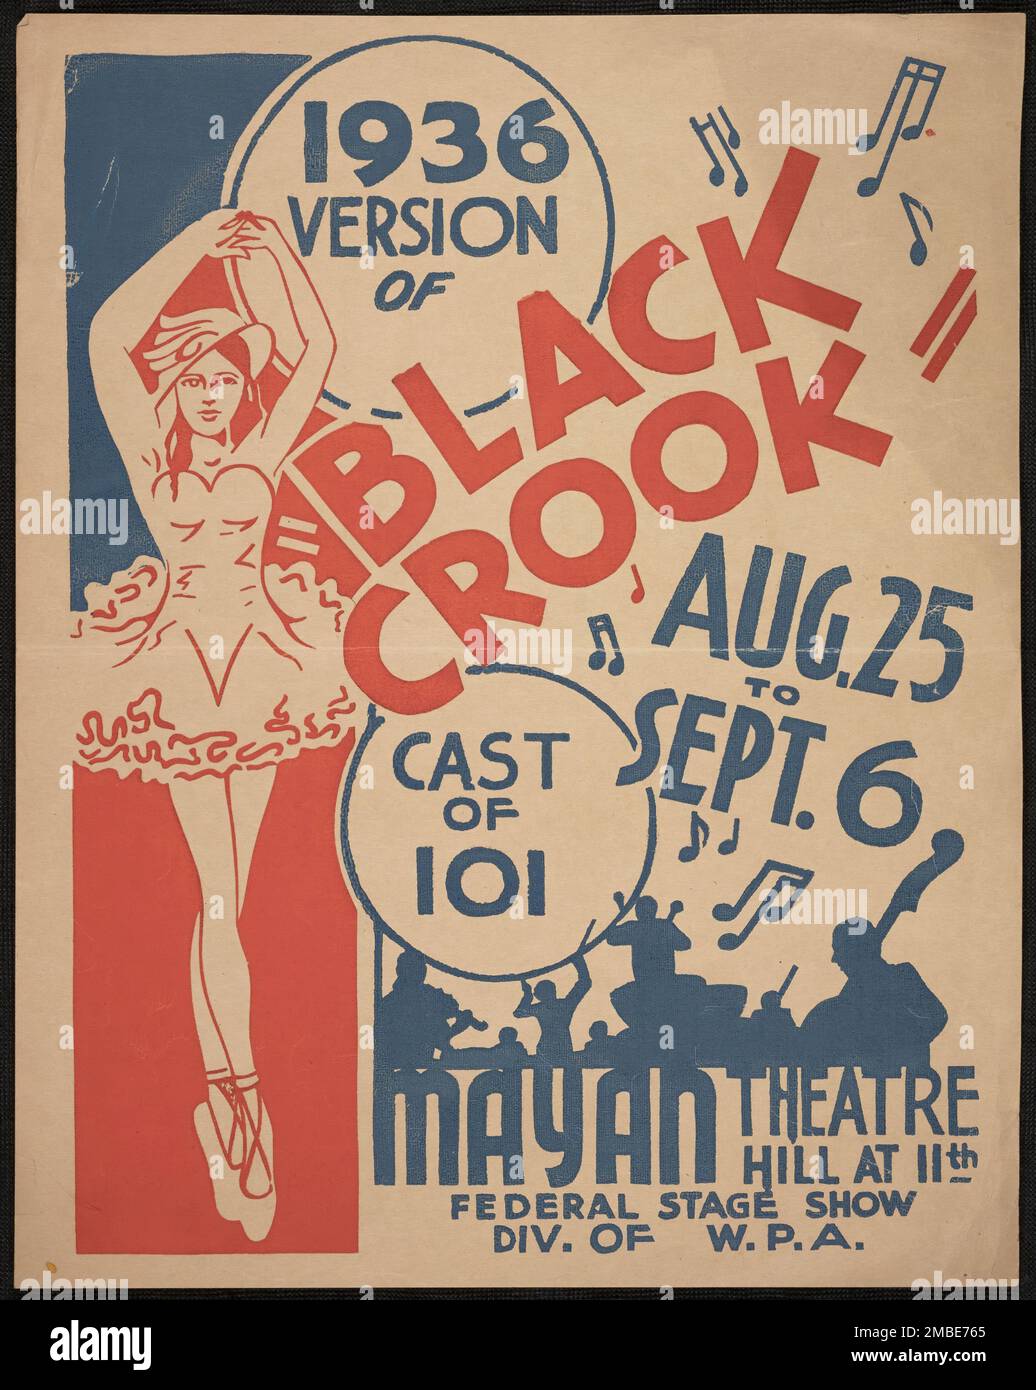 Black Crook, Los Angeles, 1936. '1936 Version of &quot;Black Crook&quot;...Cast of 101...Mayan Theatre...Federal Stage Show - Div. of W.P.A.'. &quot;The Black Crook&quot;, first produced in New York City with great success in 1866, is claimed by many to be the first popular piece that conforms to the modern notion of a musical. The Federal Theatre Project, created by the U.S. Works Progress Administration in 1935, was designed to conserve and develop the skills of theater workers, re-employ them on public relief, and to bring theater to thousands in the United States who had never before seen Stock Photo